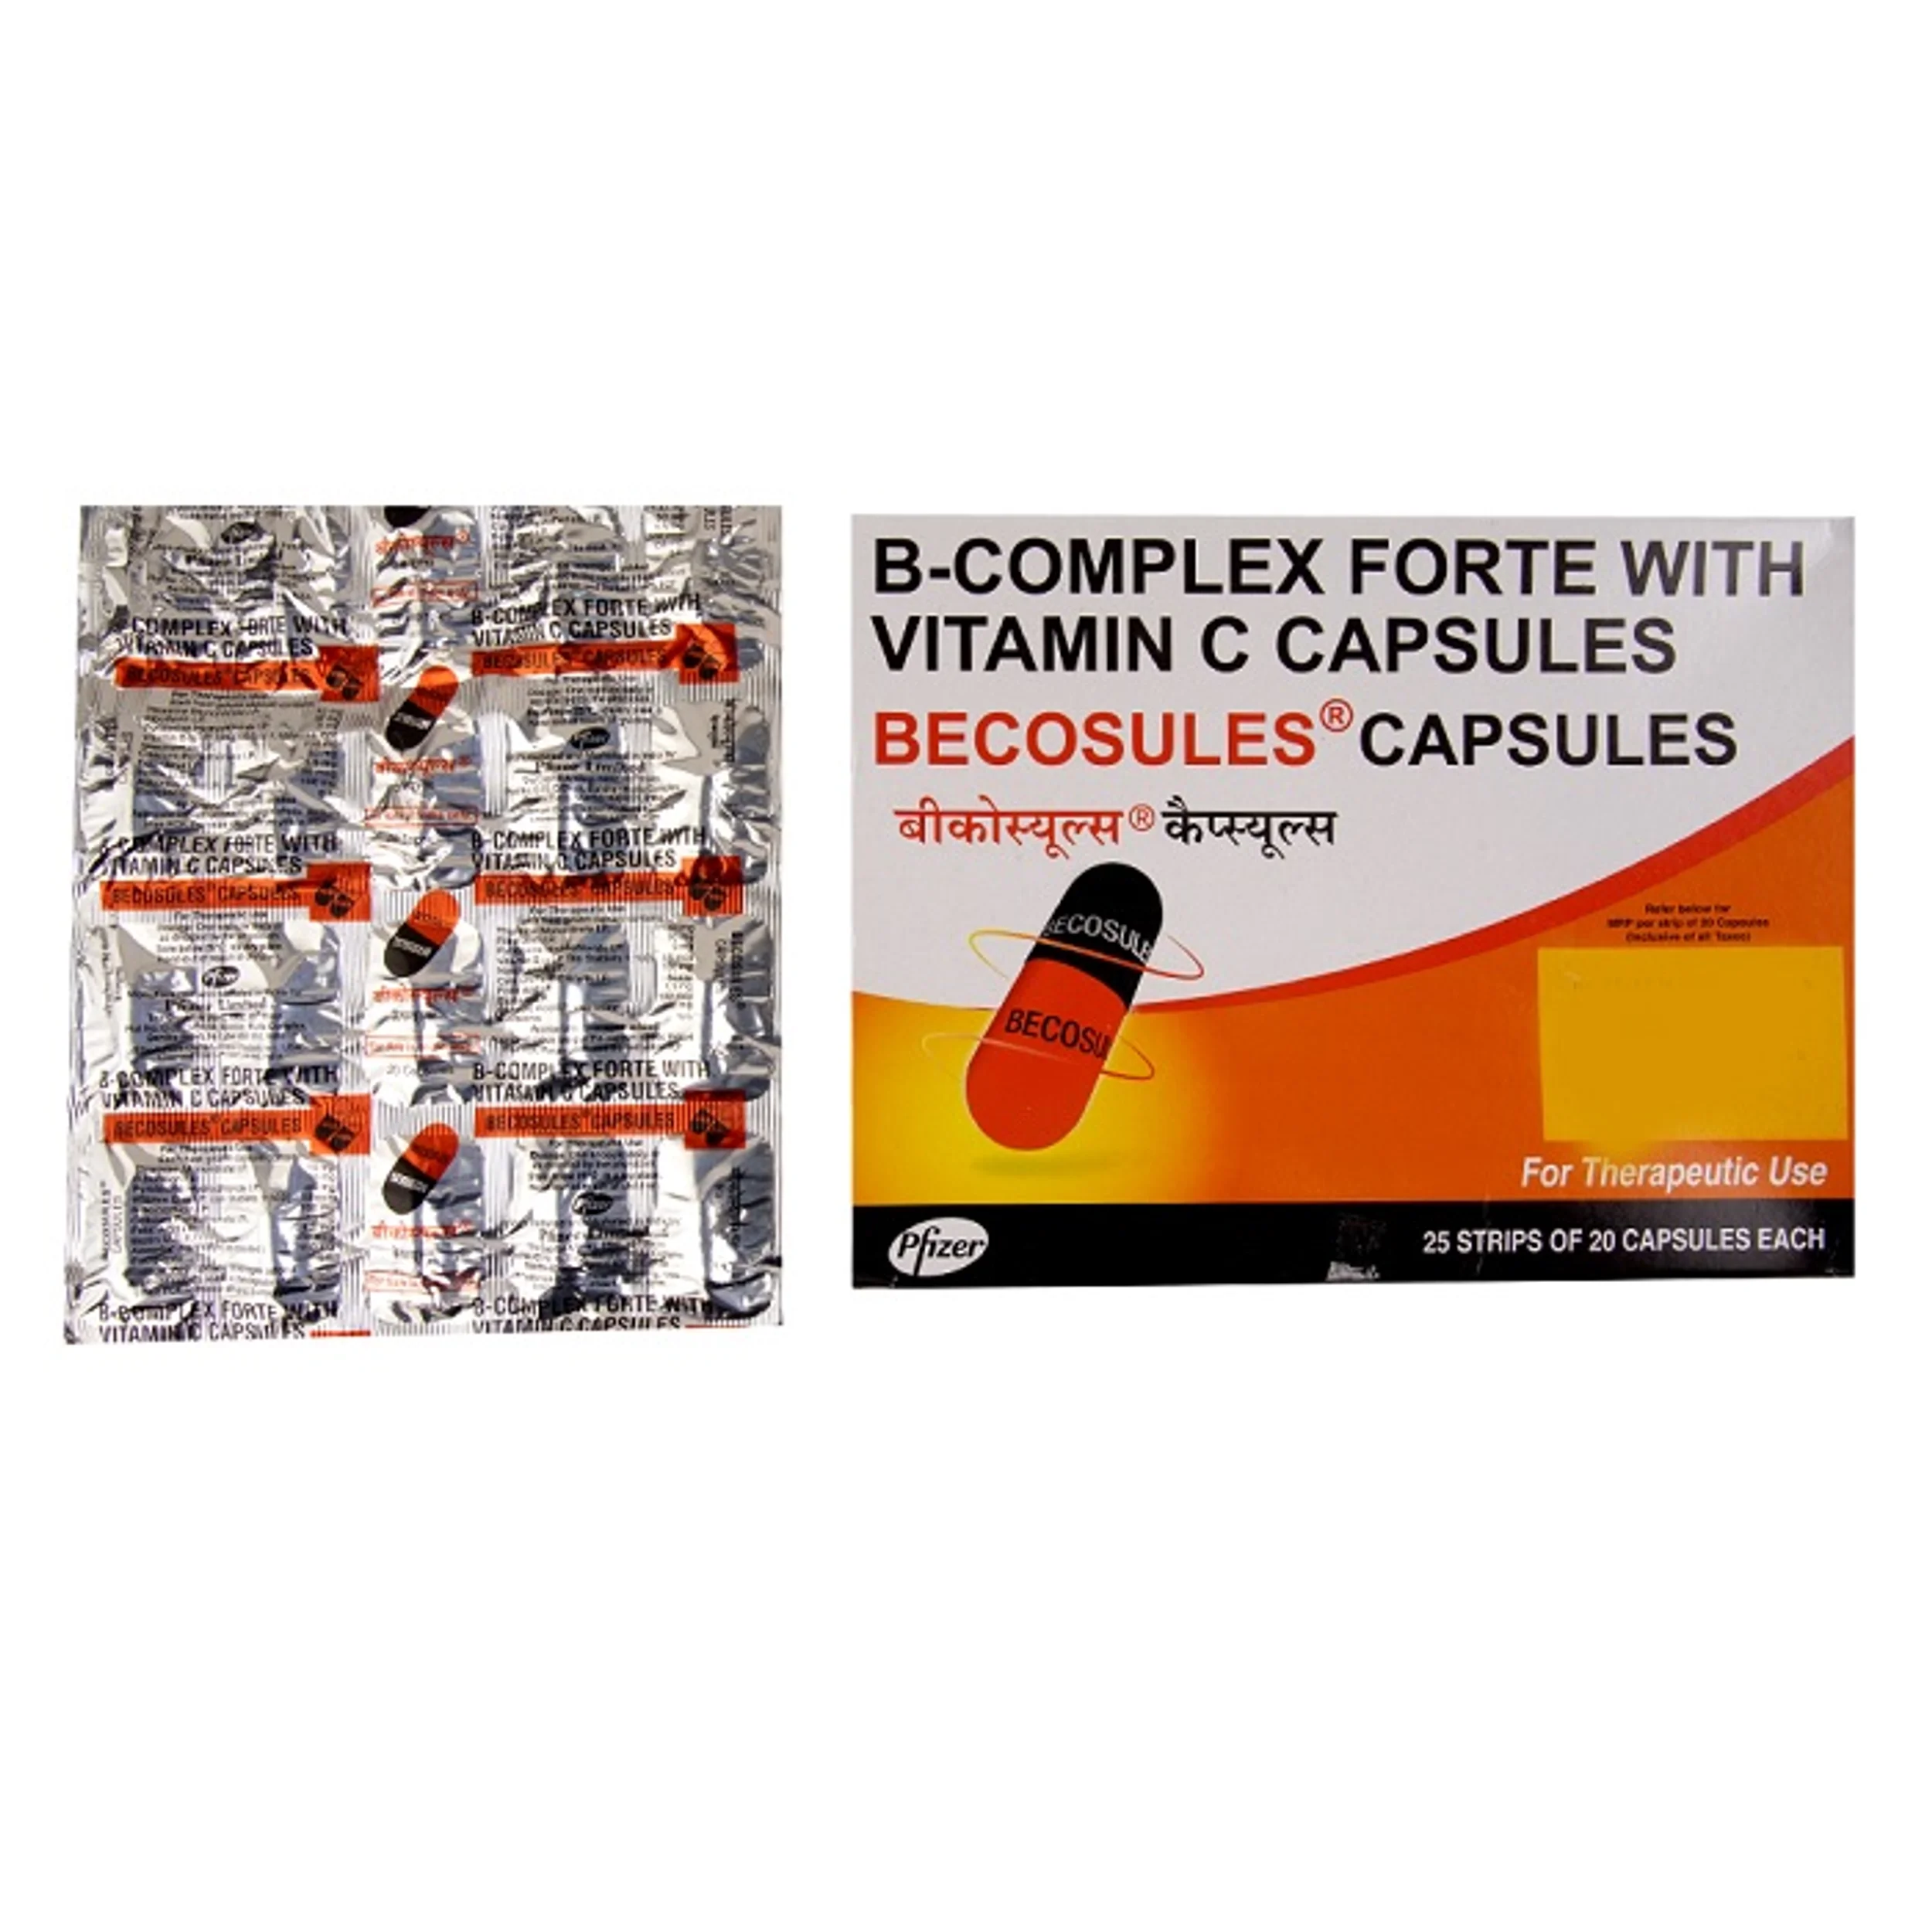 The Health Benefits of Becosules Capsules